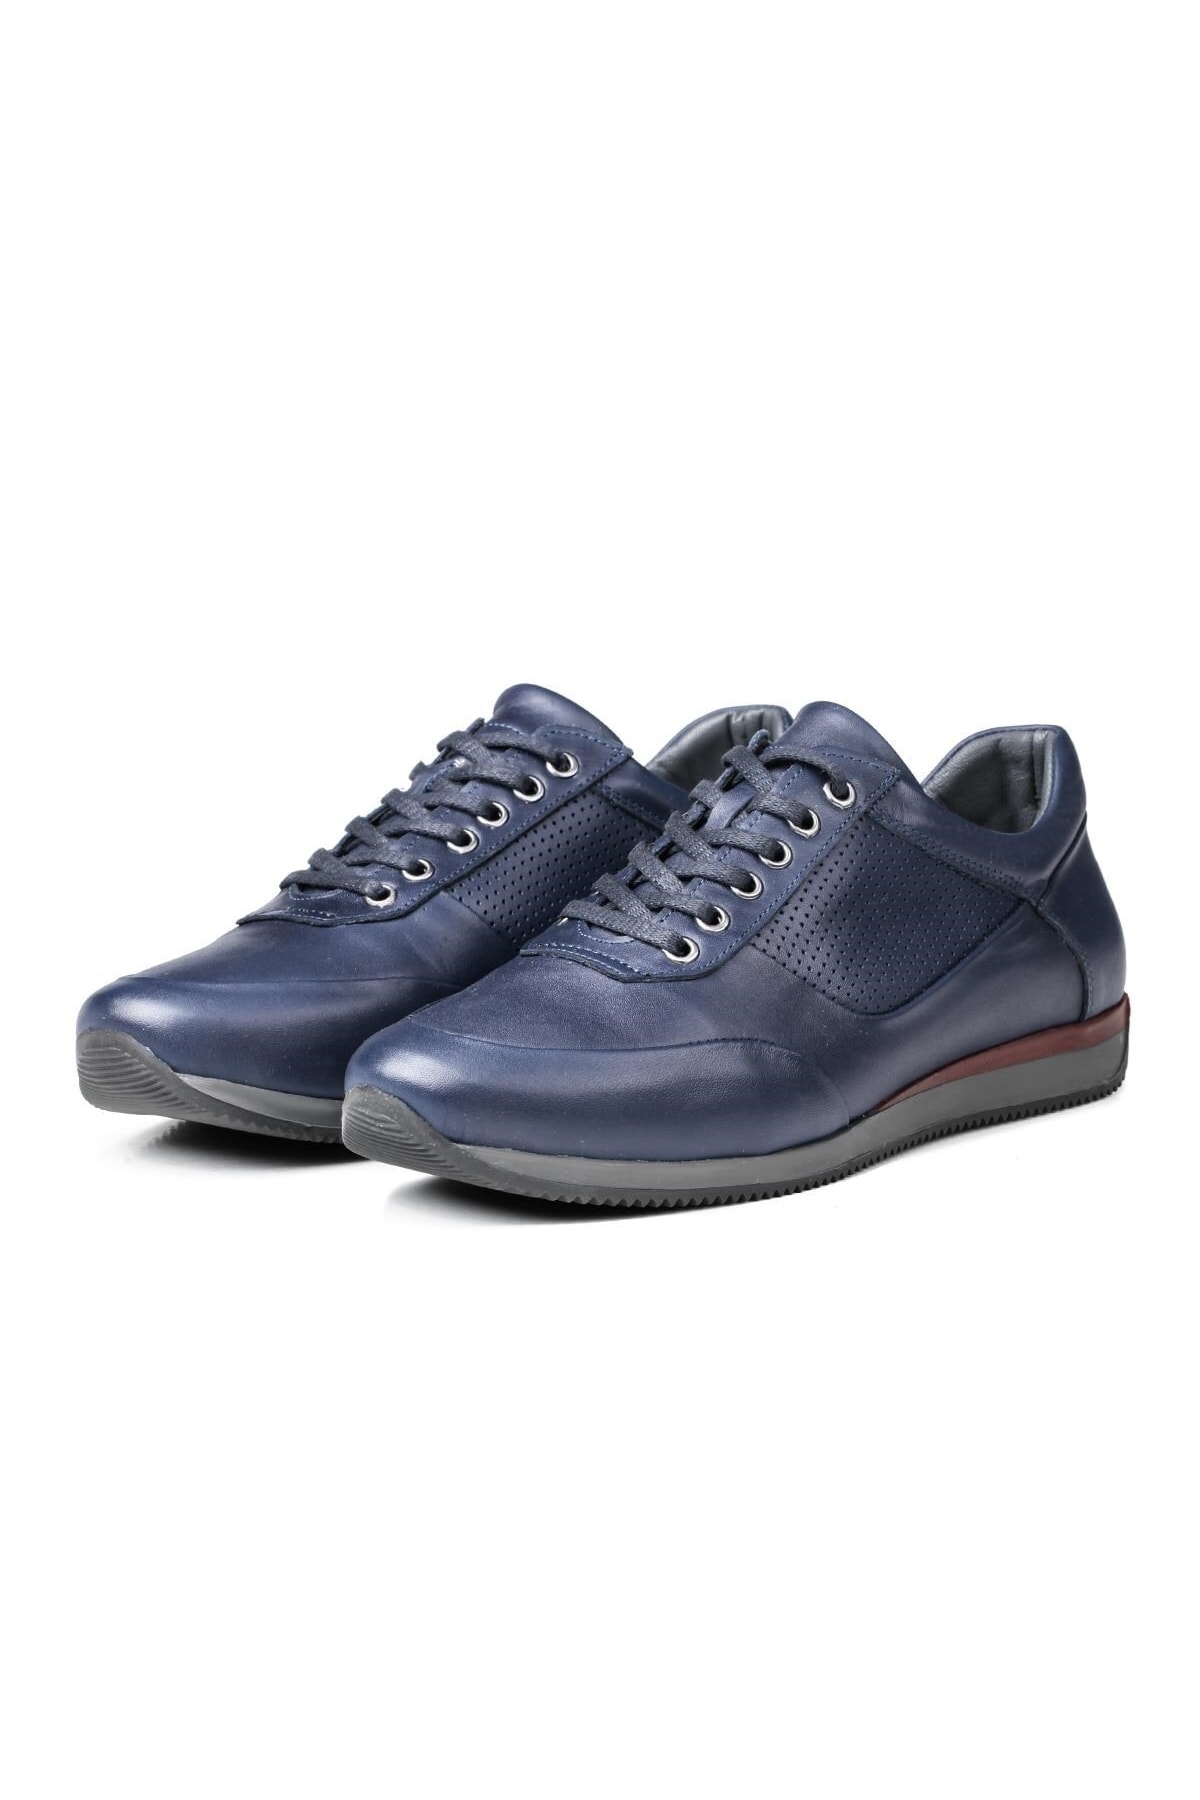 Levně Ducavelli Lion Point Men's Casual Shoes From Genuine Leather With Plush Shearling, Navy Blue.